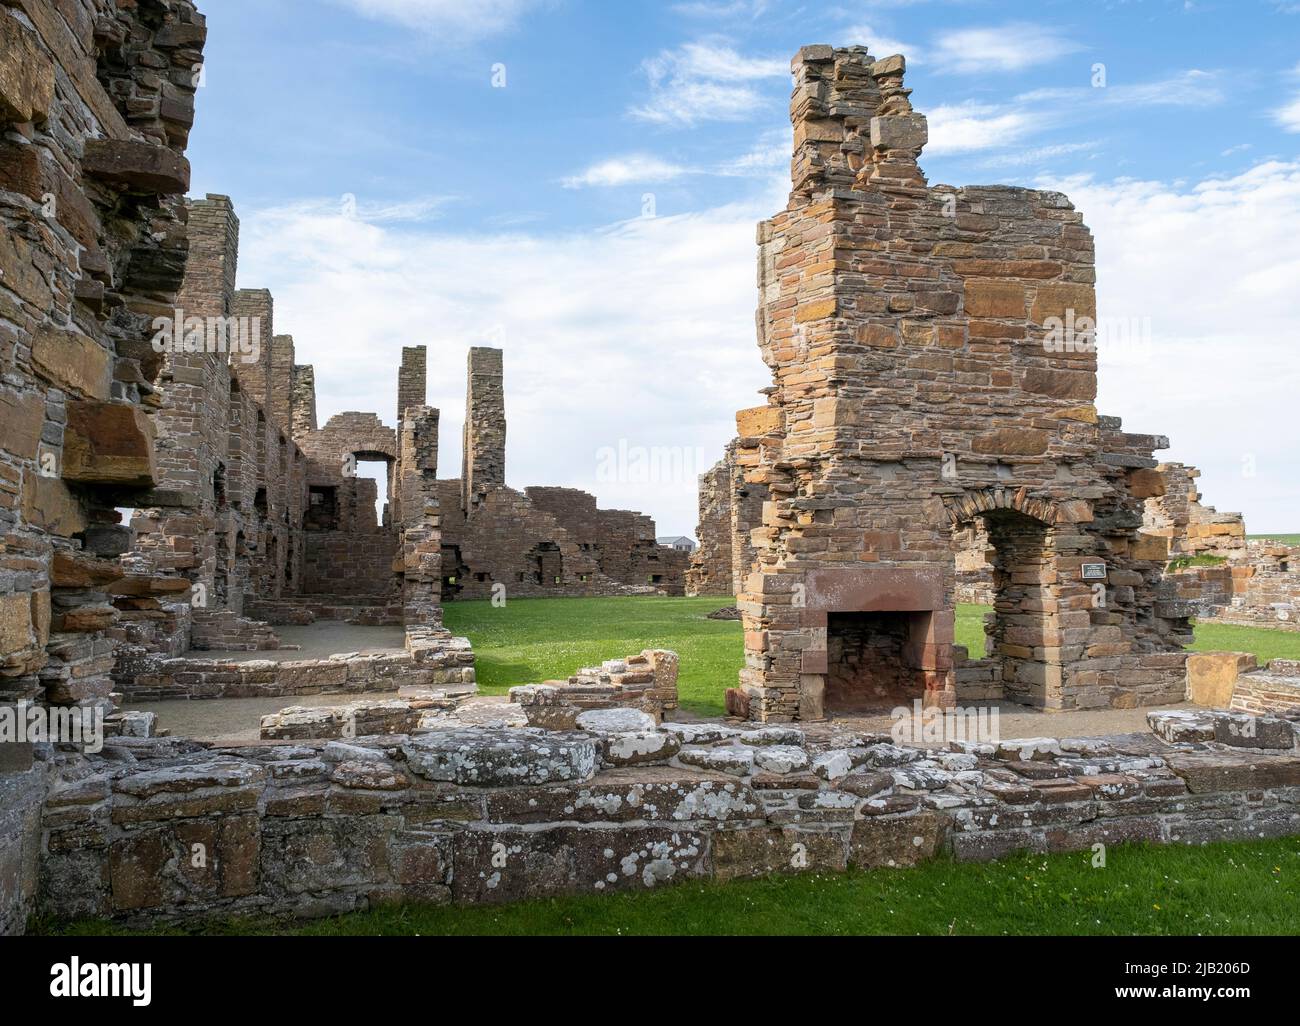 Ruins of the Earl's Palace, a 16th century castle in Birsay, Mainland, Orkney, Scotland, UK Stock Photo